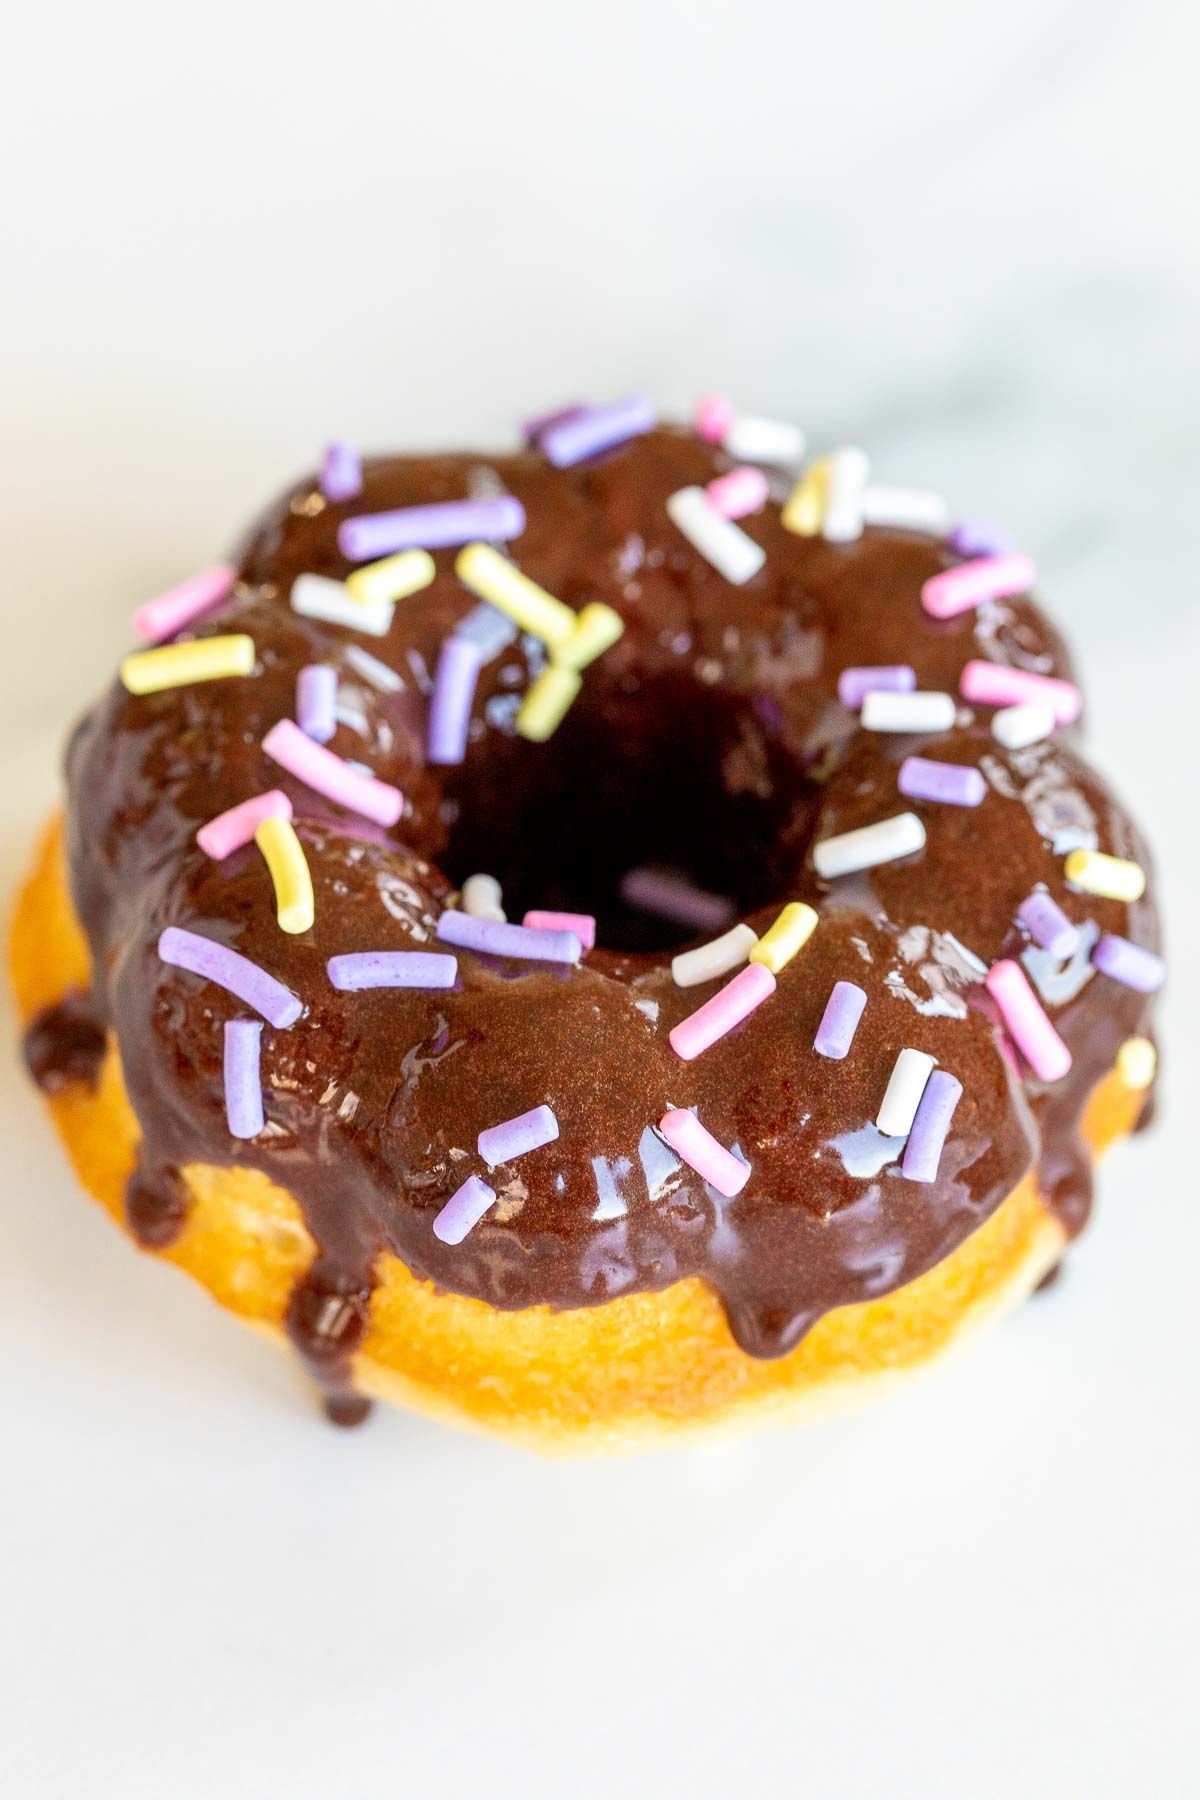 A homemade baked donut covered in chocolate frosting and sprinkles.